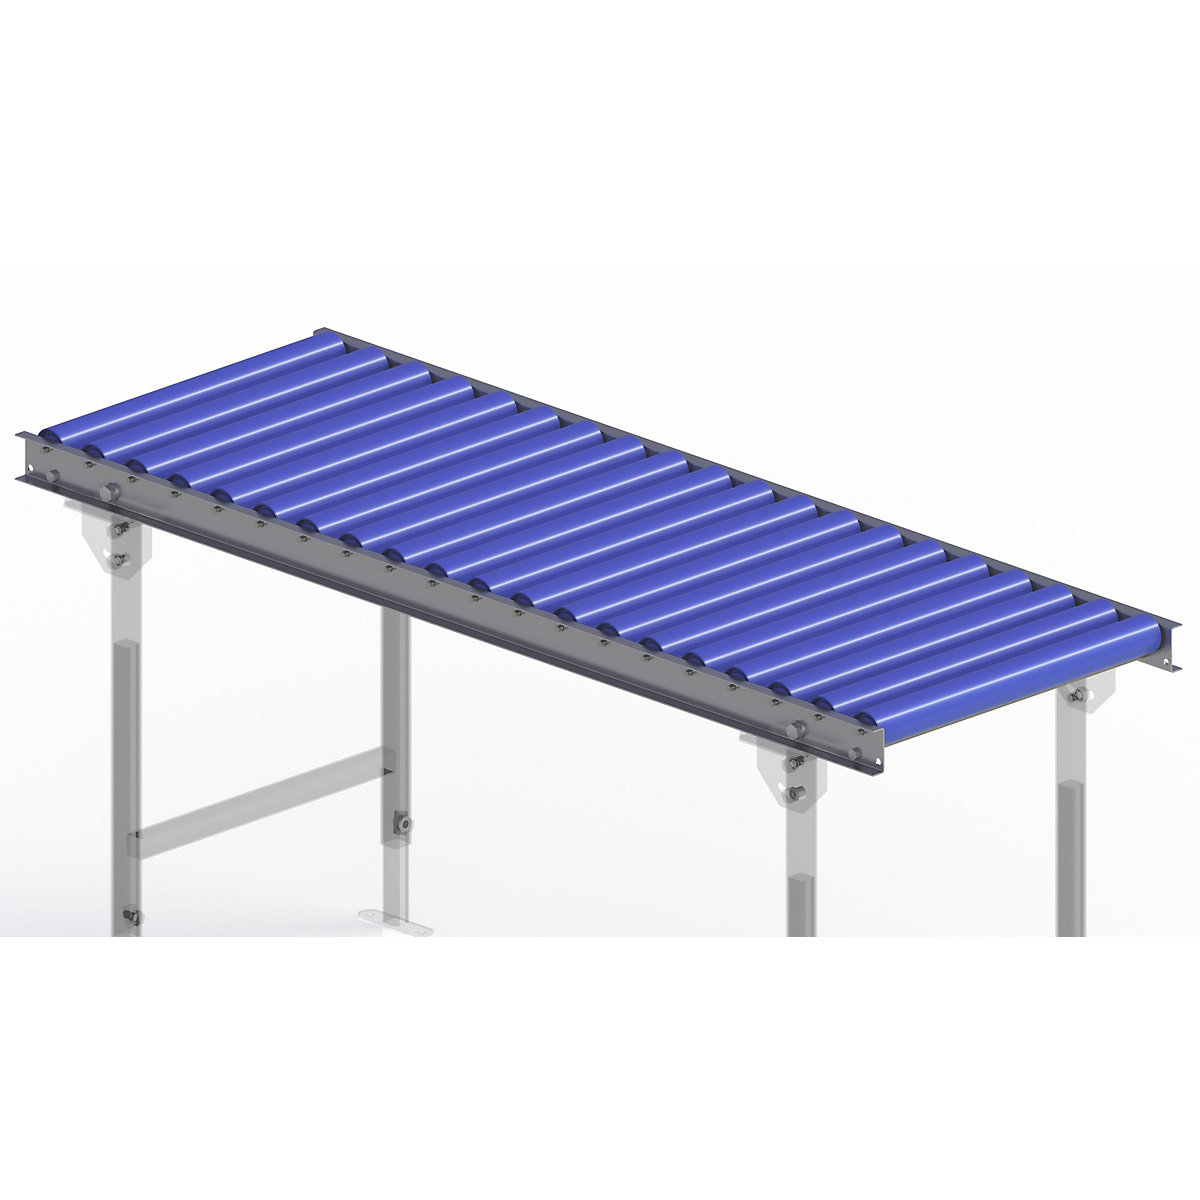 Gura – Light duty roller conveyor, steel frame with plastic rollers, track width 500 mm, axle spacing 75 mm, length 1.5 m